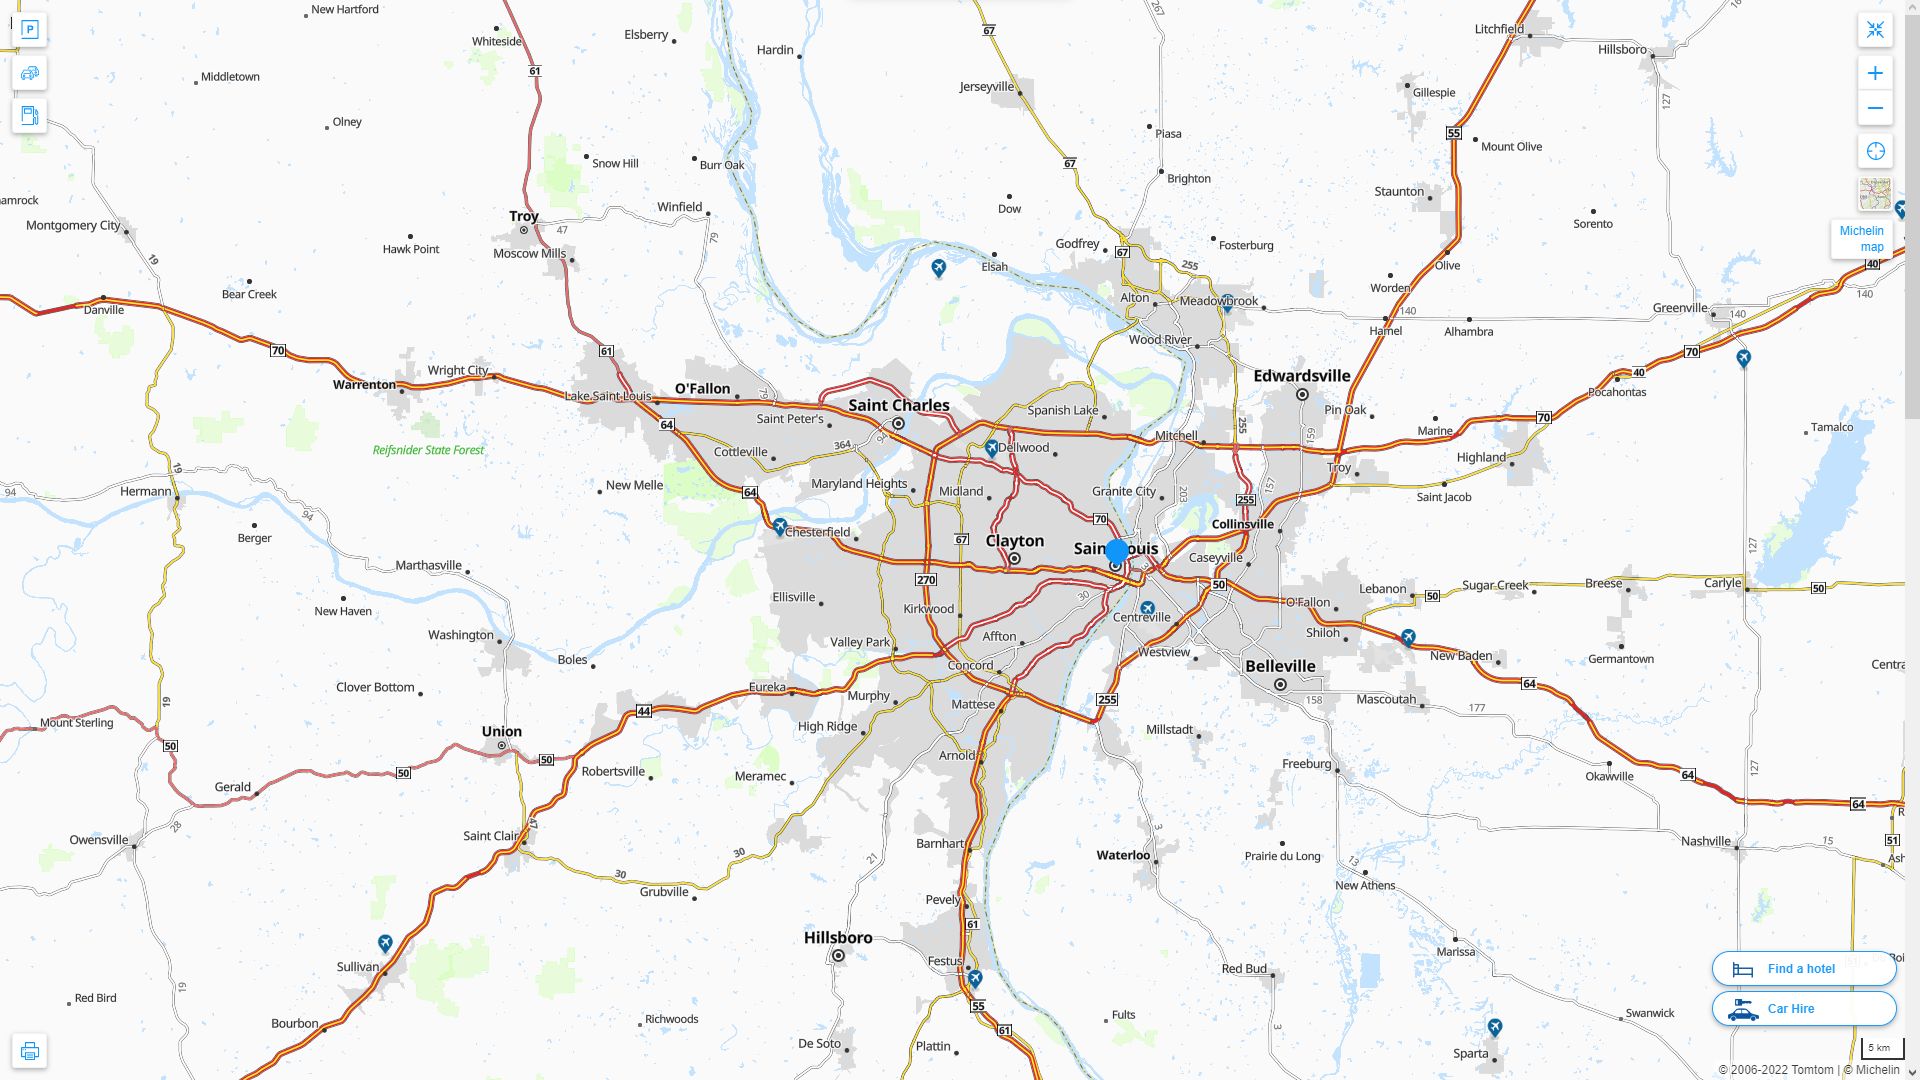 St. Louis Missouri Highway and Road Map